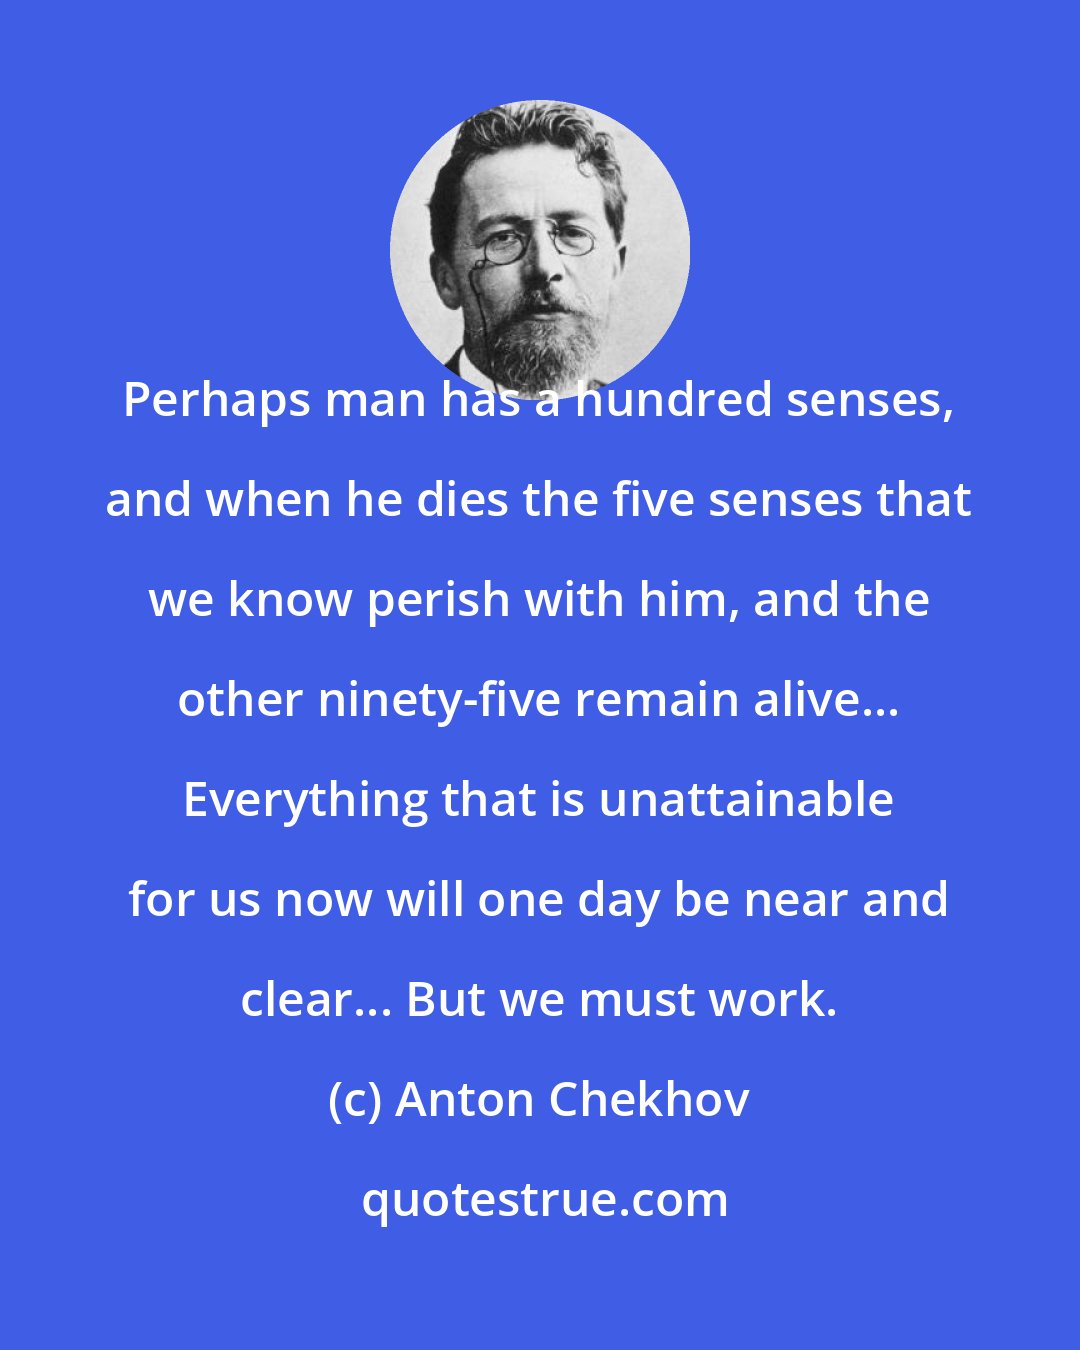 Anton Chekhov: Perhaps man has a hundred senses, and when he dies the five senses that we know perish with him, and the other ninety-five remain alive... Everything that is unattainable for us now will one day be near and clear... But we must work.